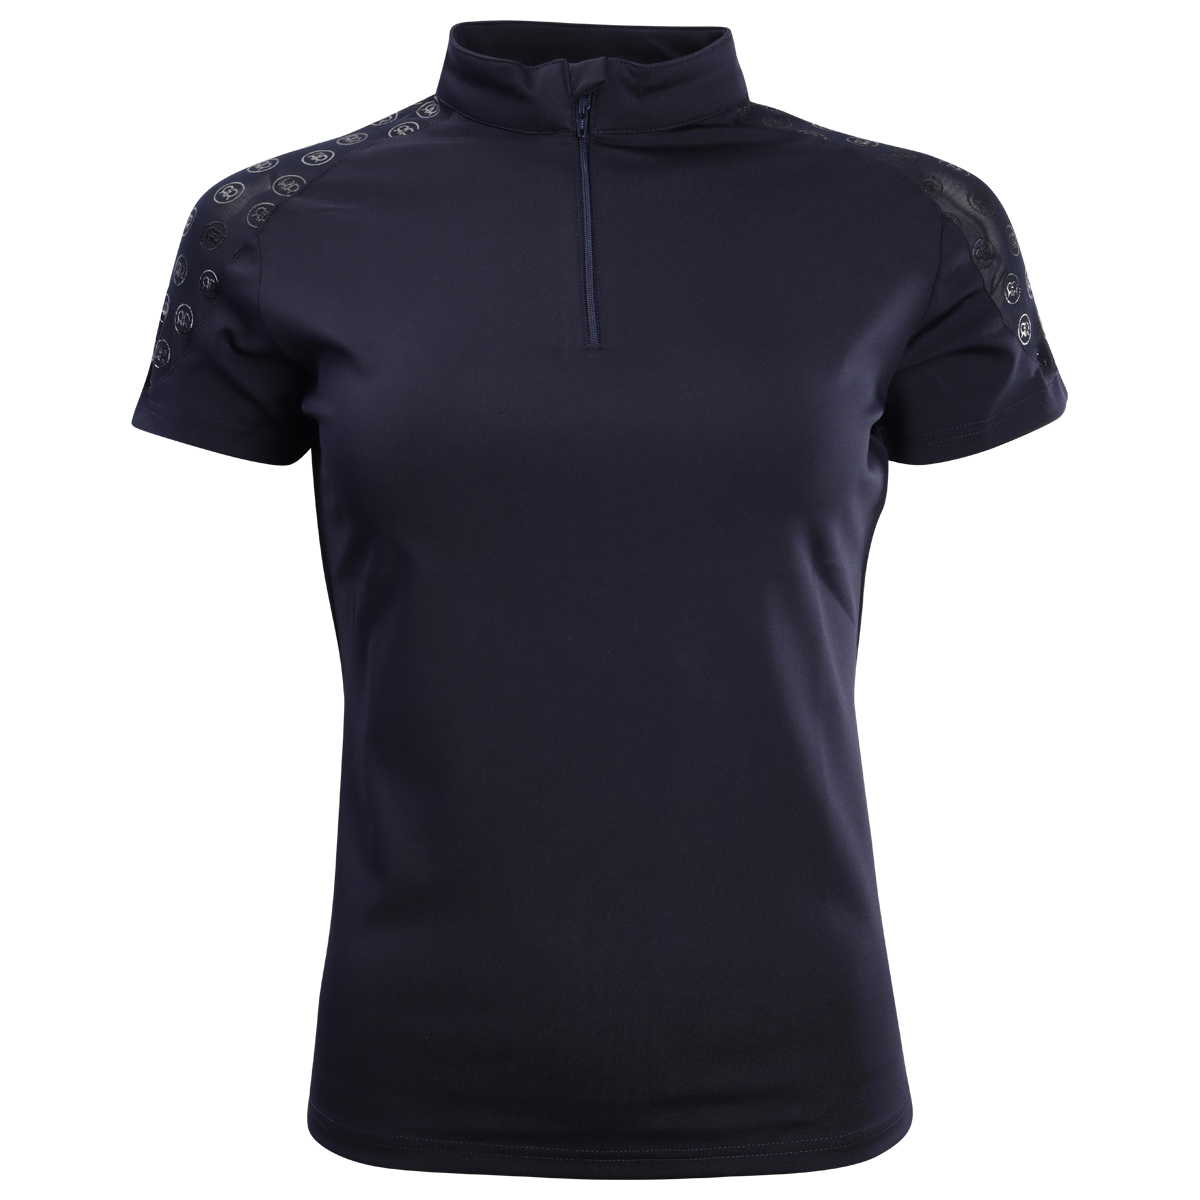 Polo Rebel By Montar Mesh Donkerblauw, S in donkerblauw